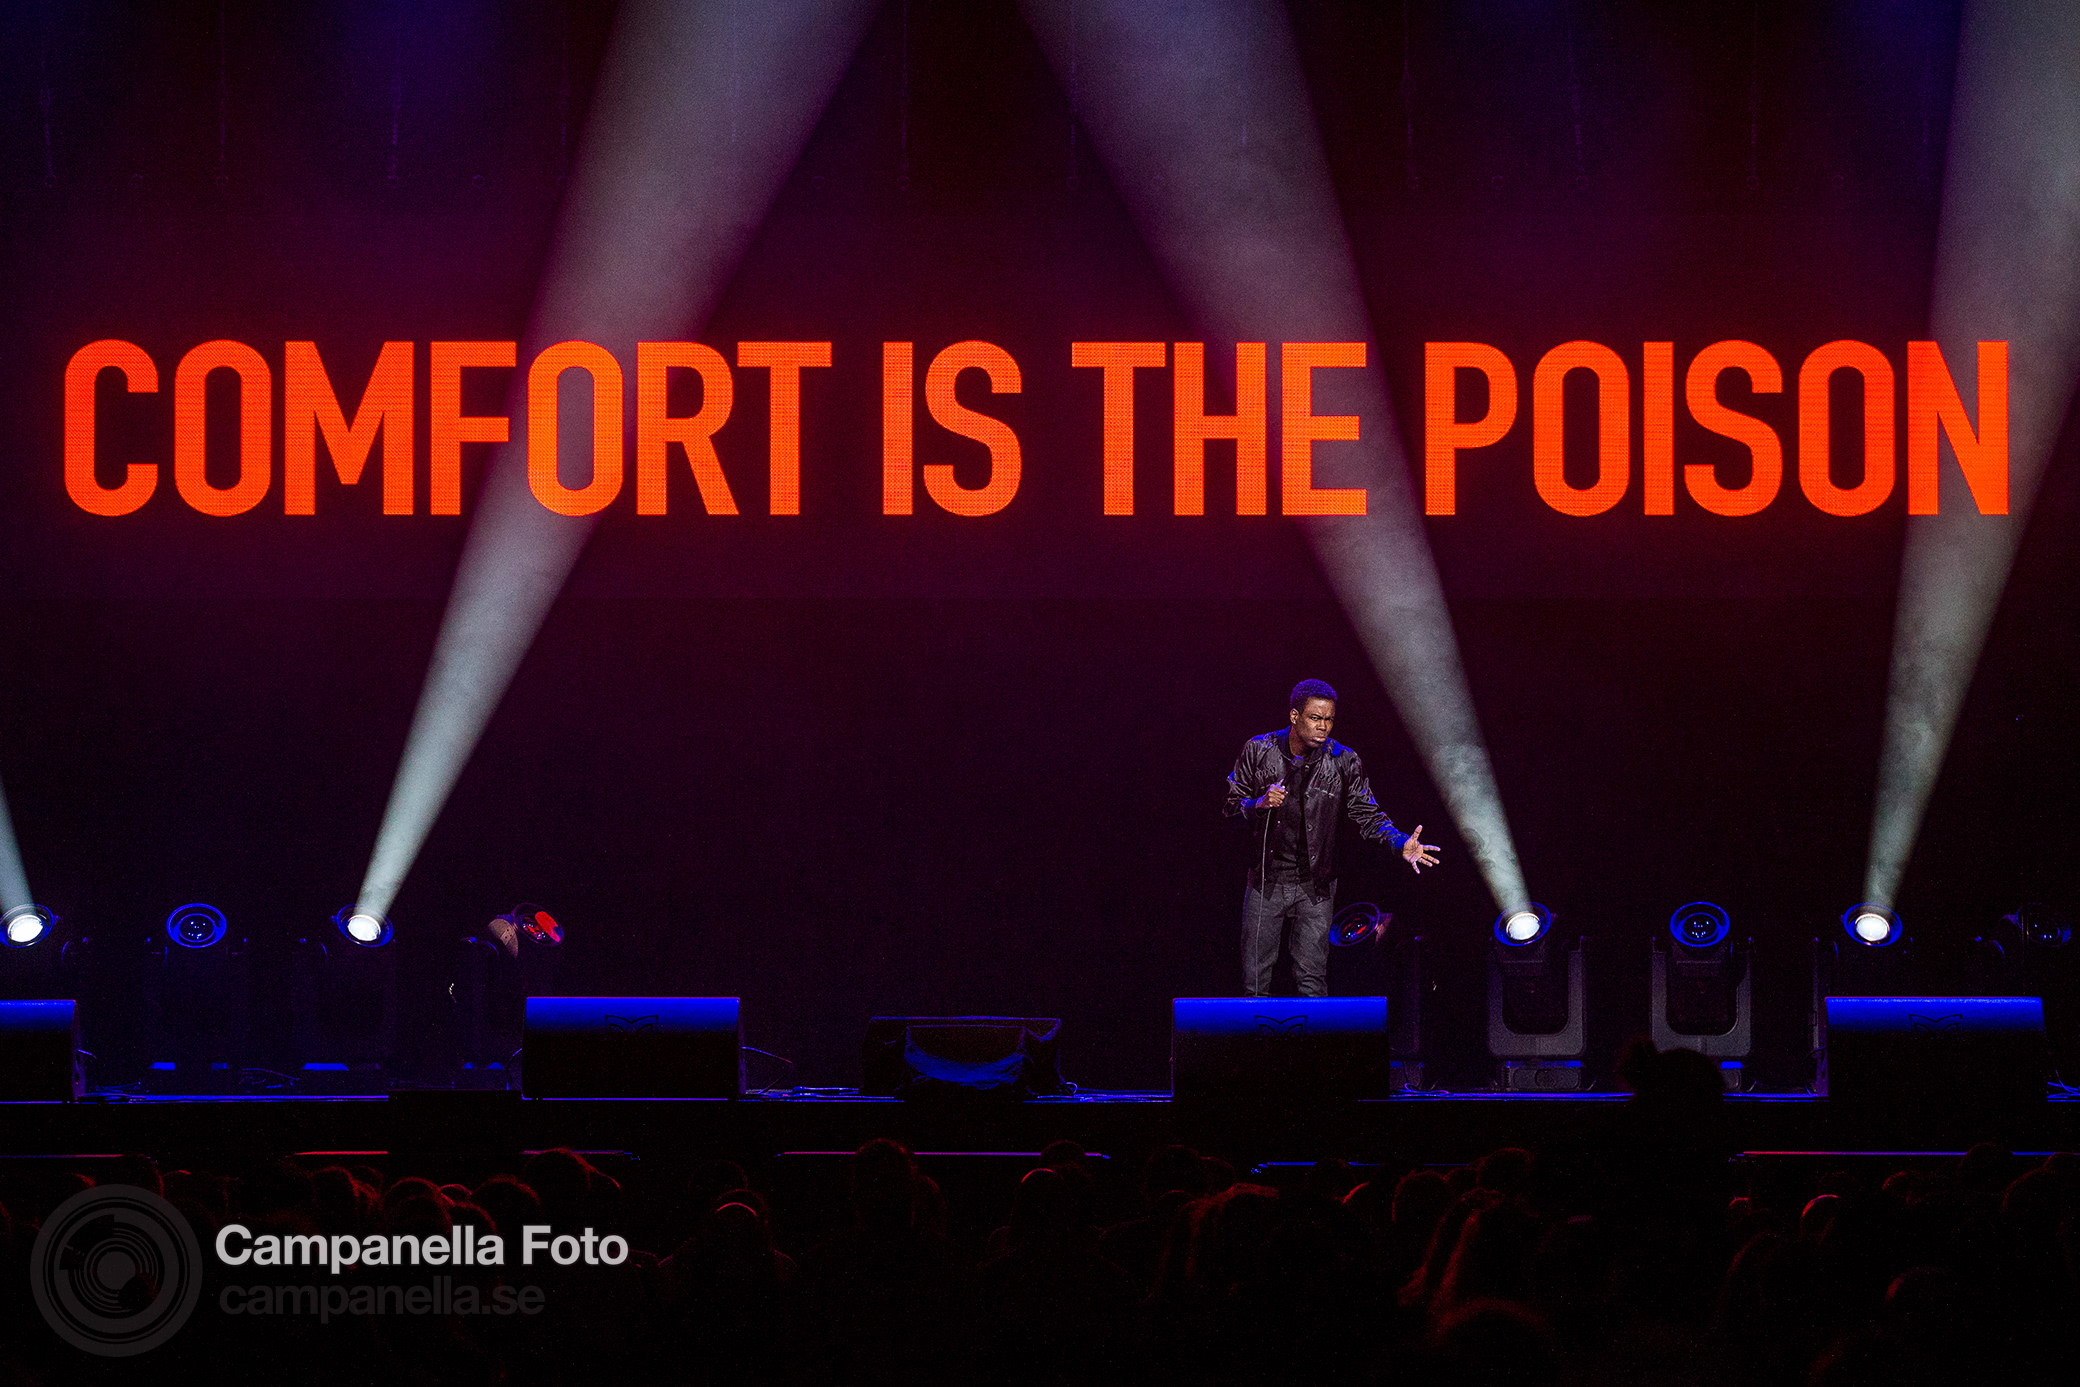 Chris Rock performs in Stockholm - Michael Campanella Photography